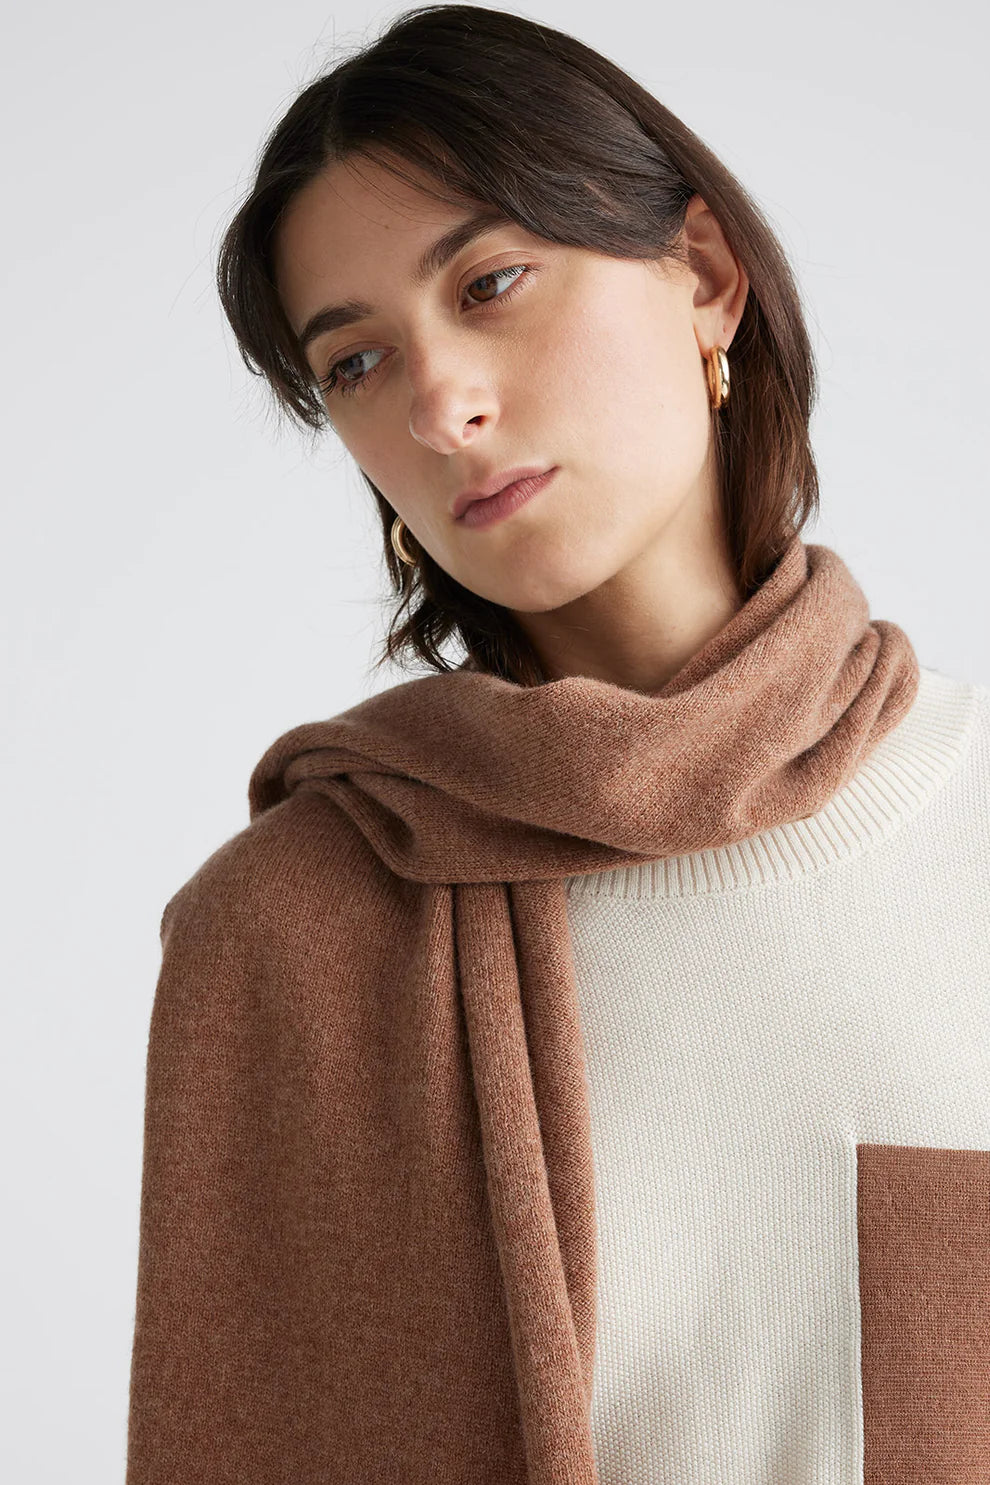 Wrap up in luxury with our brown merino lambswool scarf. Soft, stylish, and perfect for chilly days. Shop now!